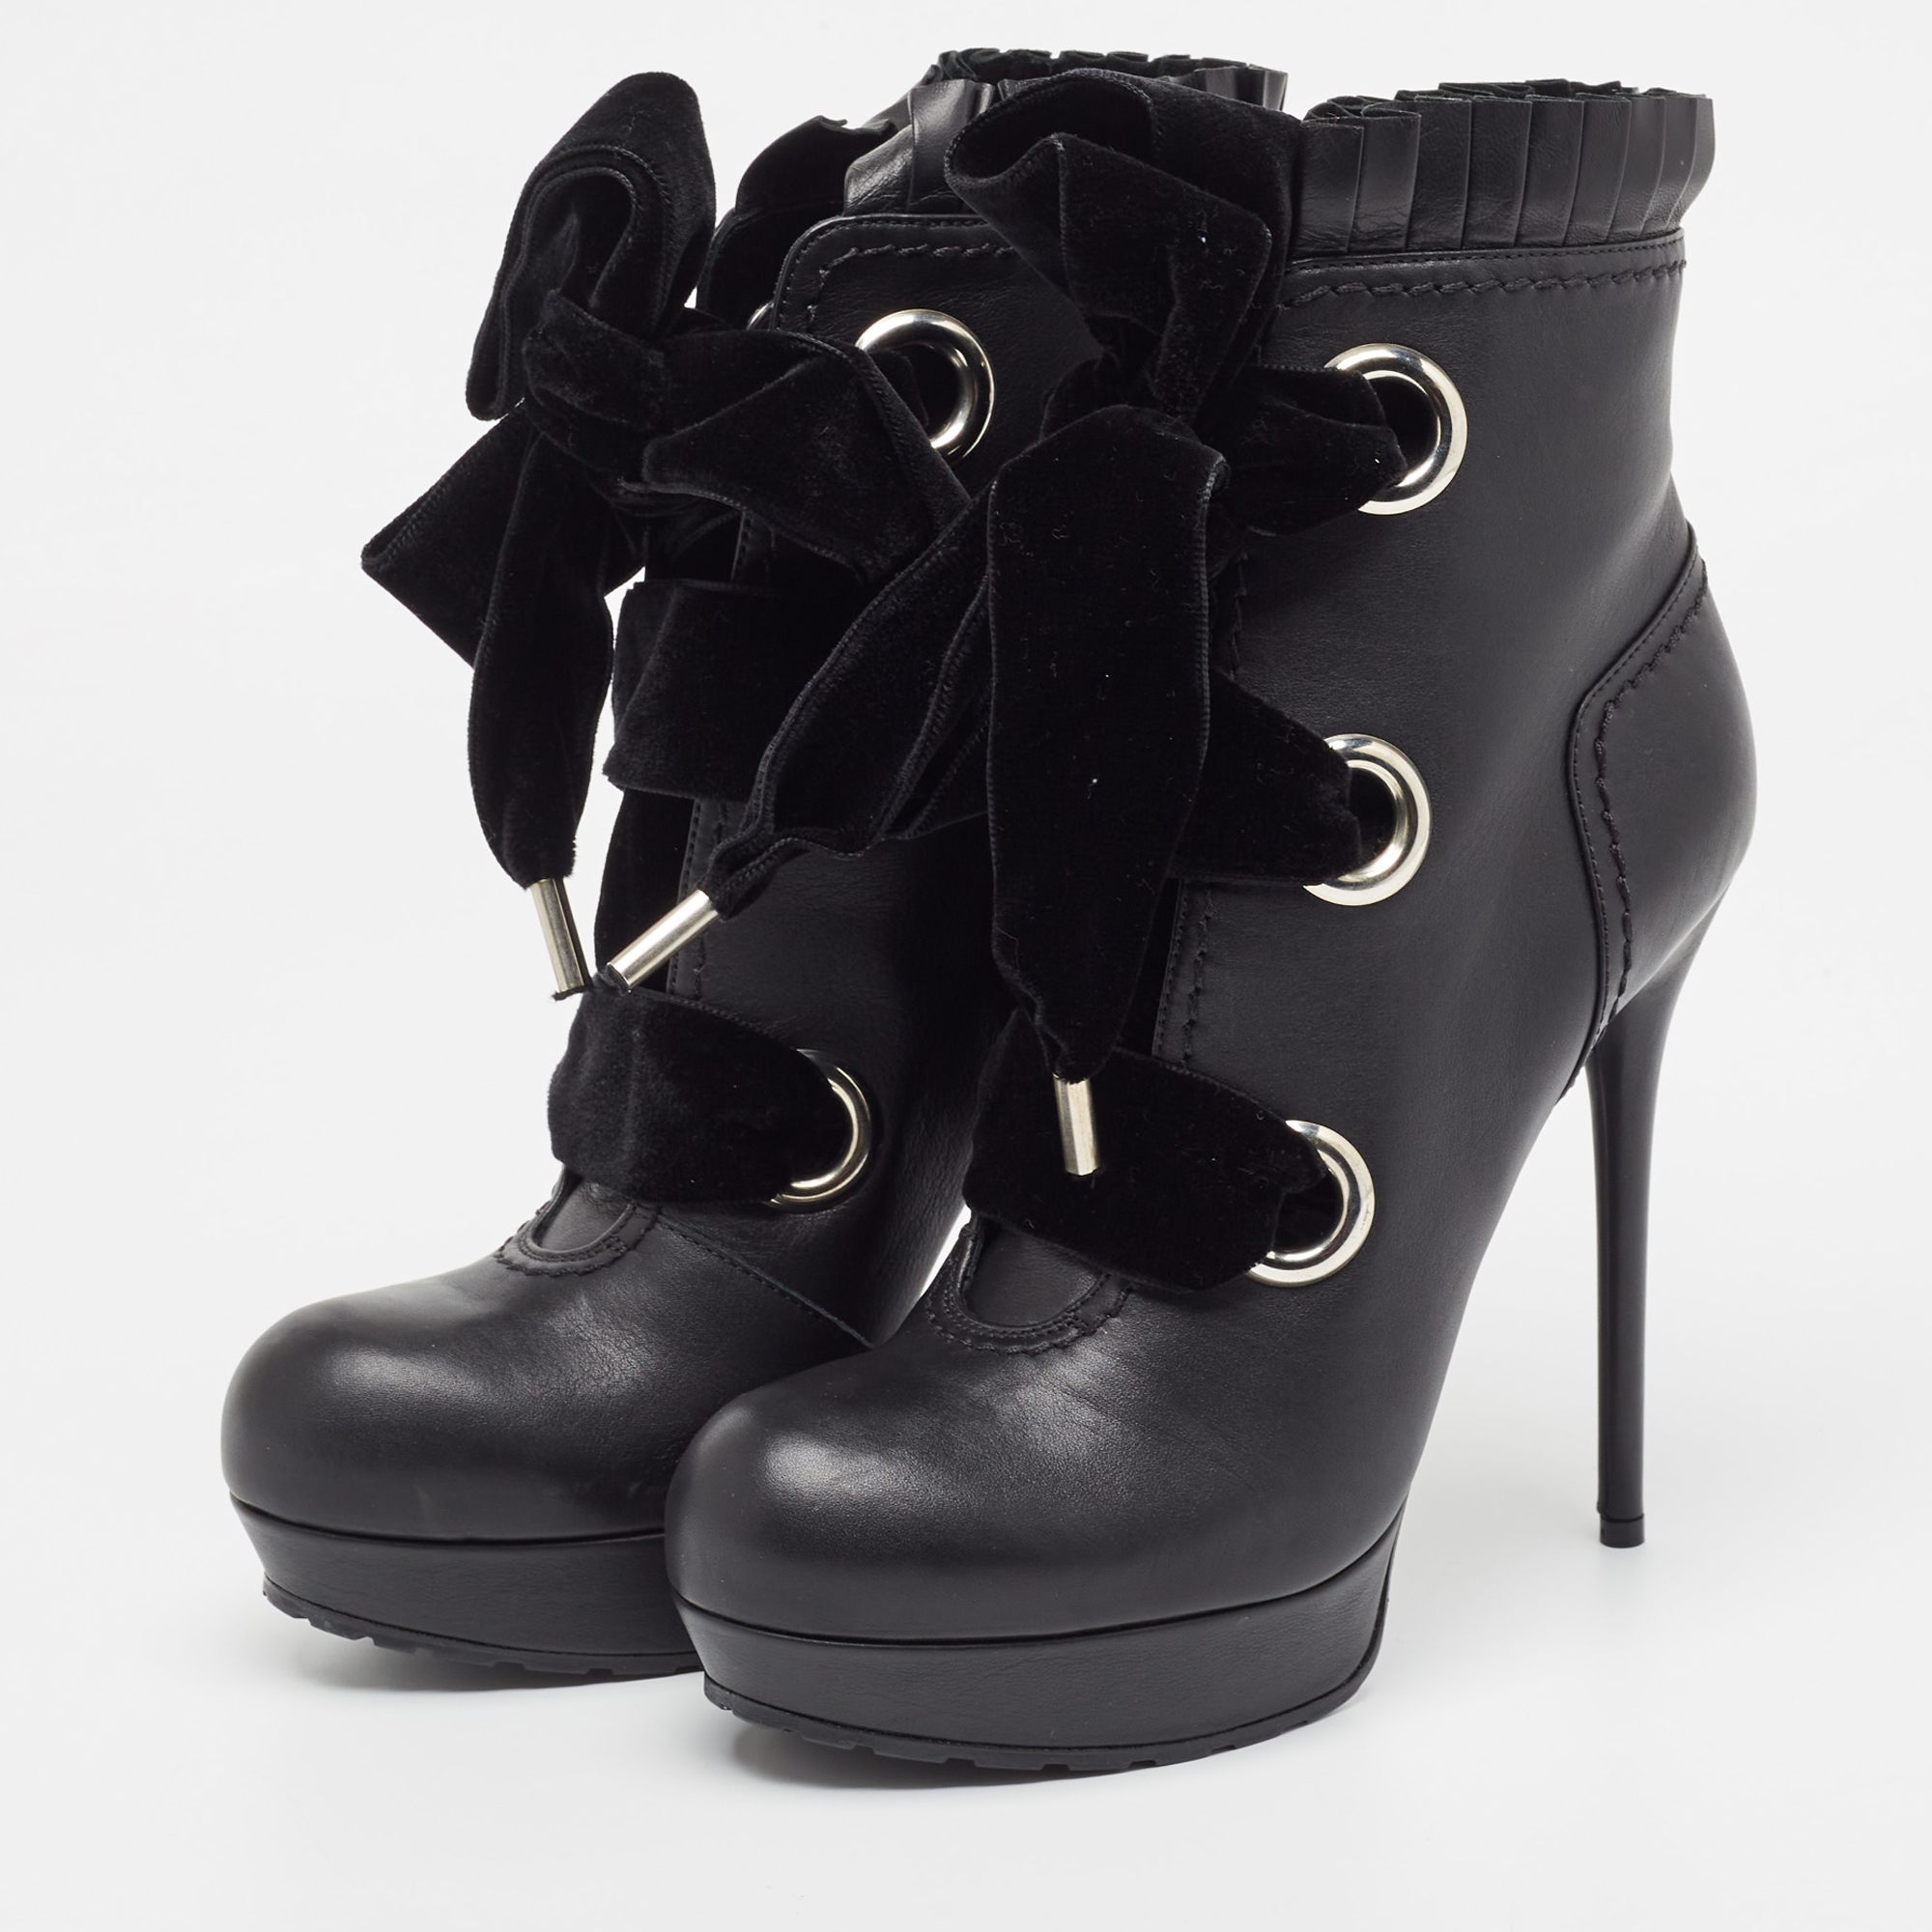 

Alexander McQueen Black Leather and Velvet Lace Up Platform Ankle Booties Size